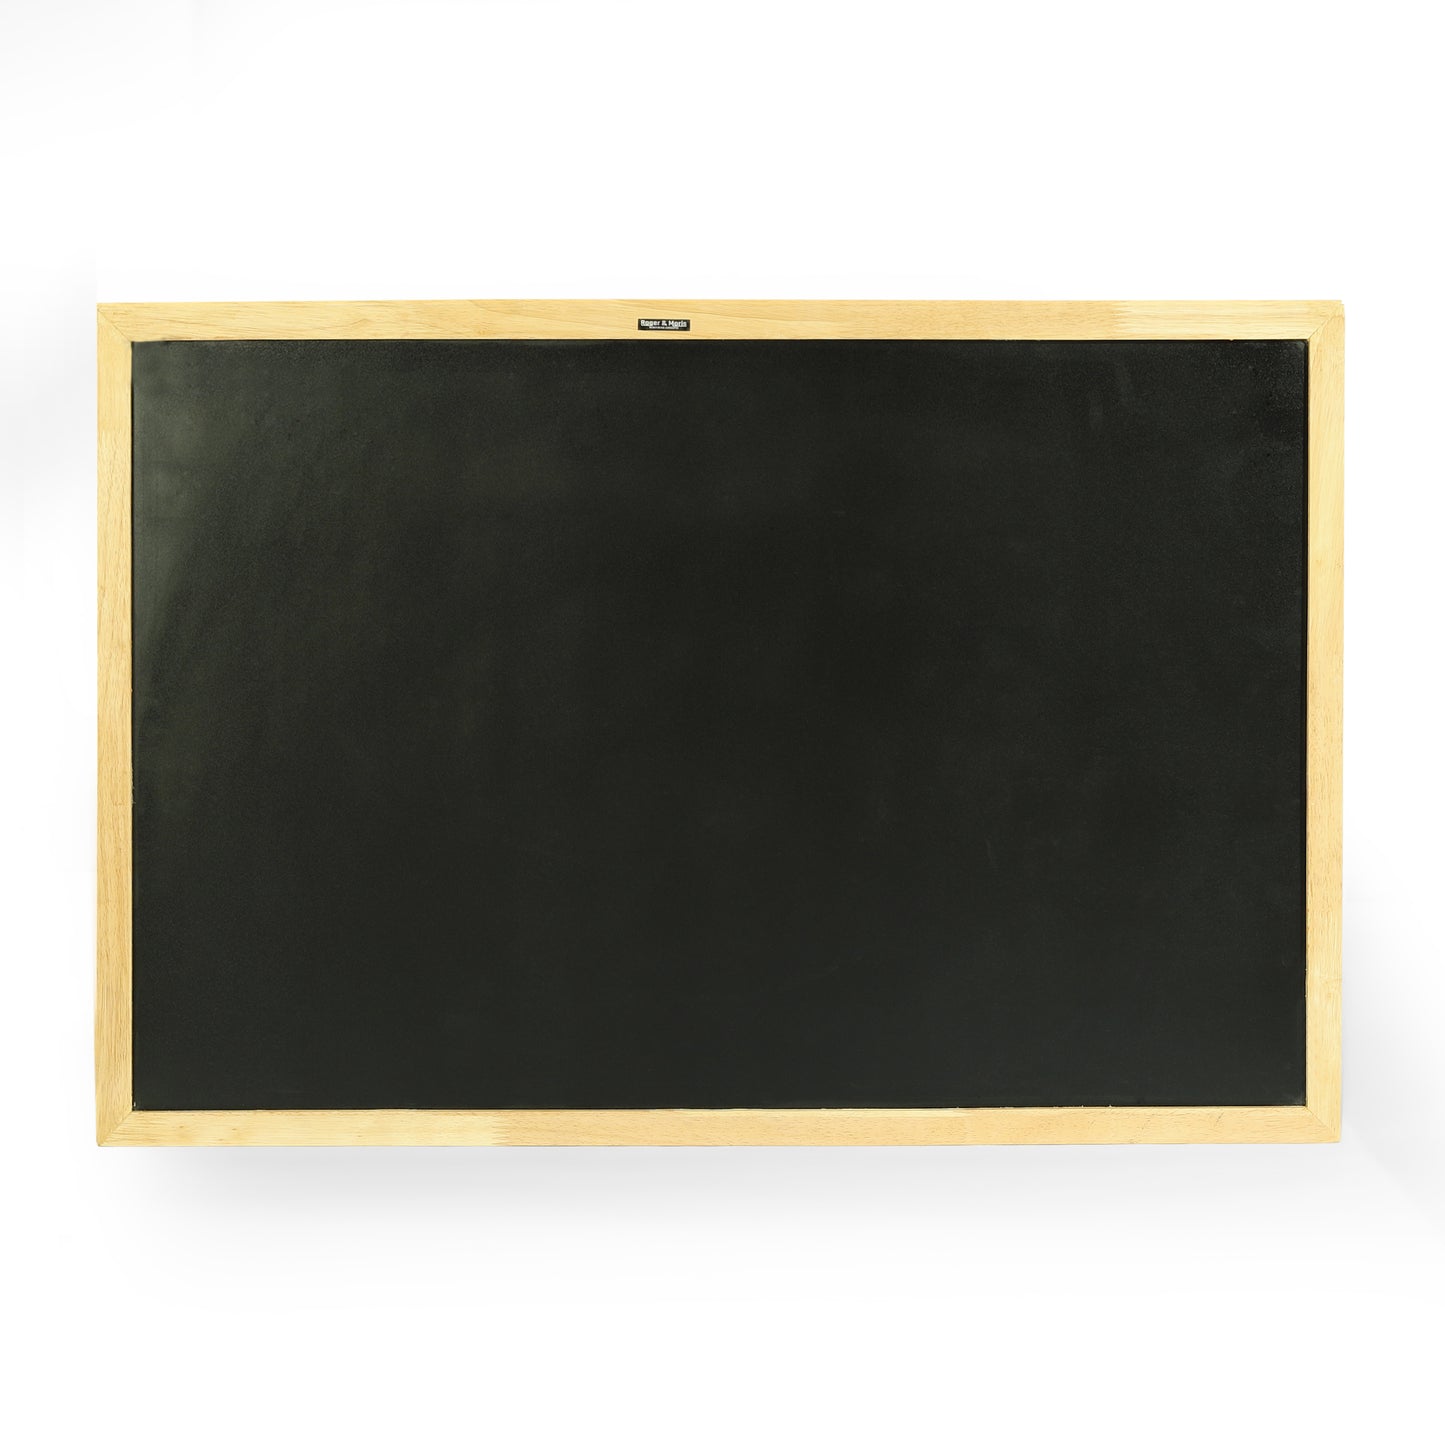 Roger & Moris Wooden (Rubber Wood) Framed Chalk Board - Non Magnetic, Lightweight for Home, Office and School (Black, Size : 1.5 feet x 1 foot)